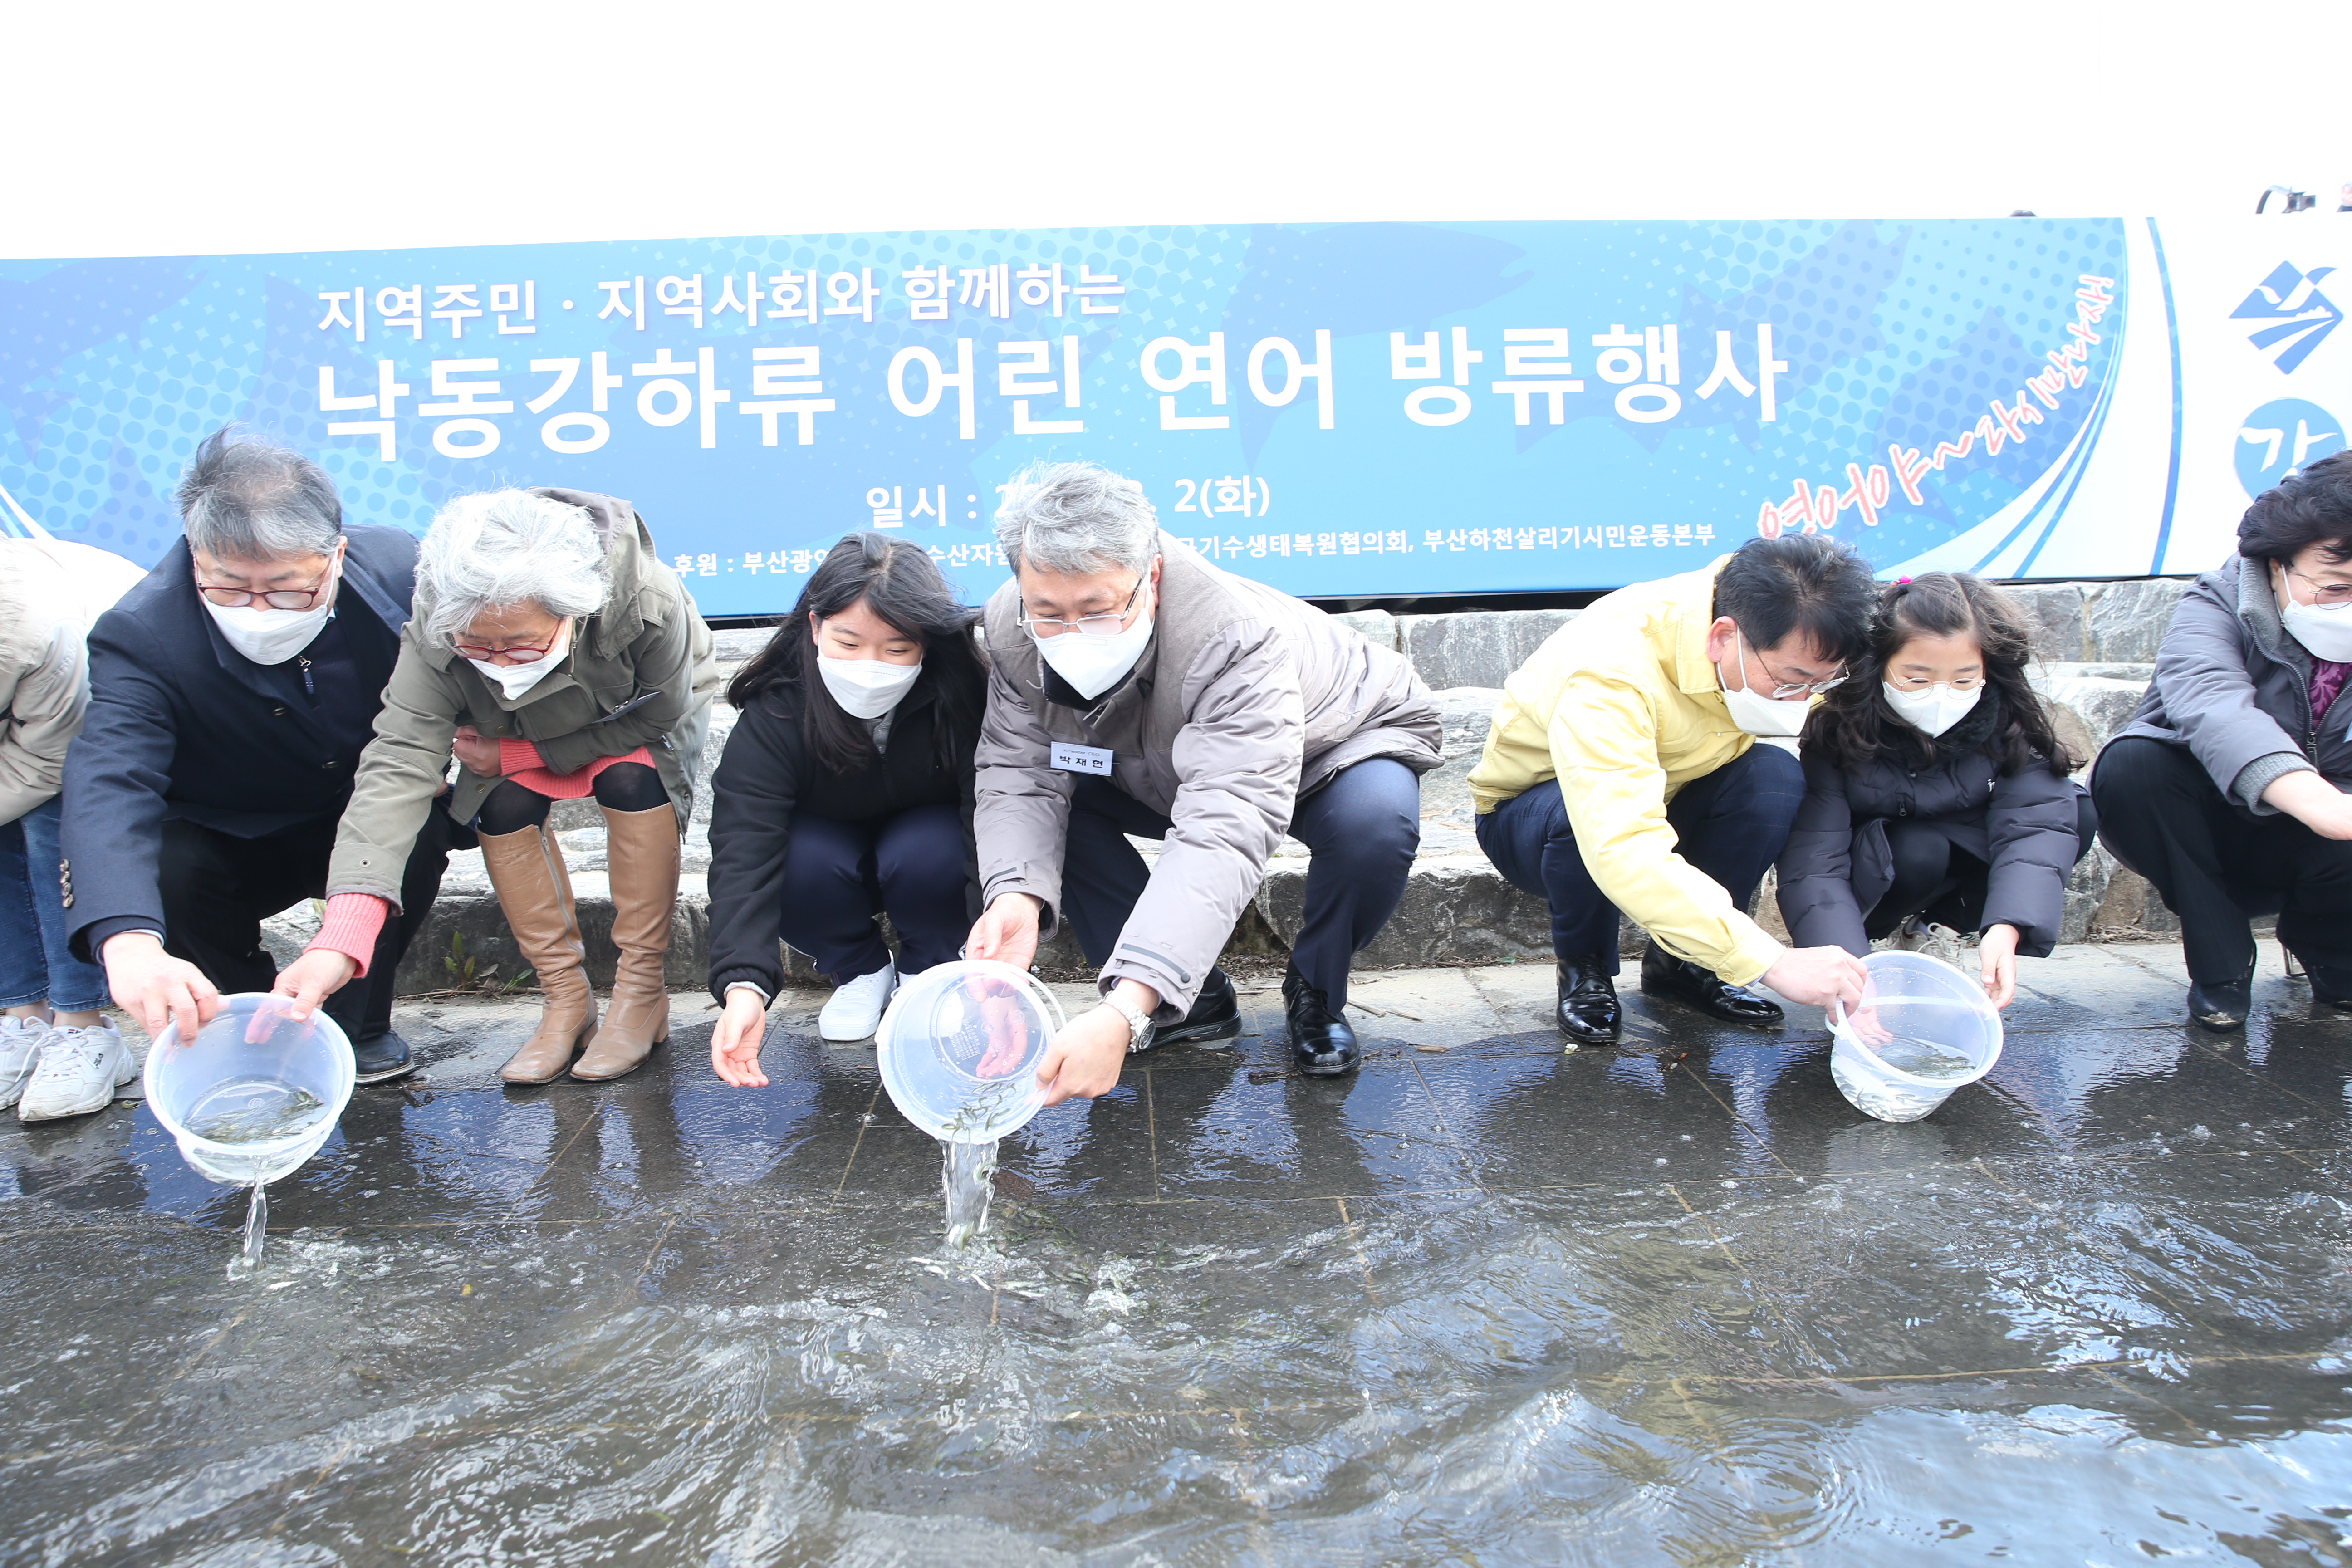 Releasing ceremory of Little salmon